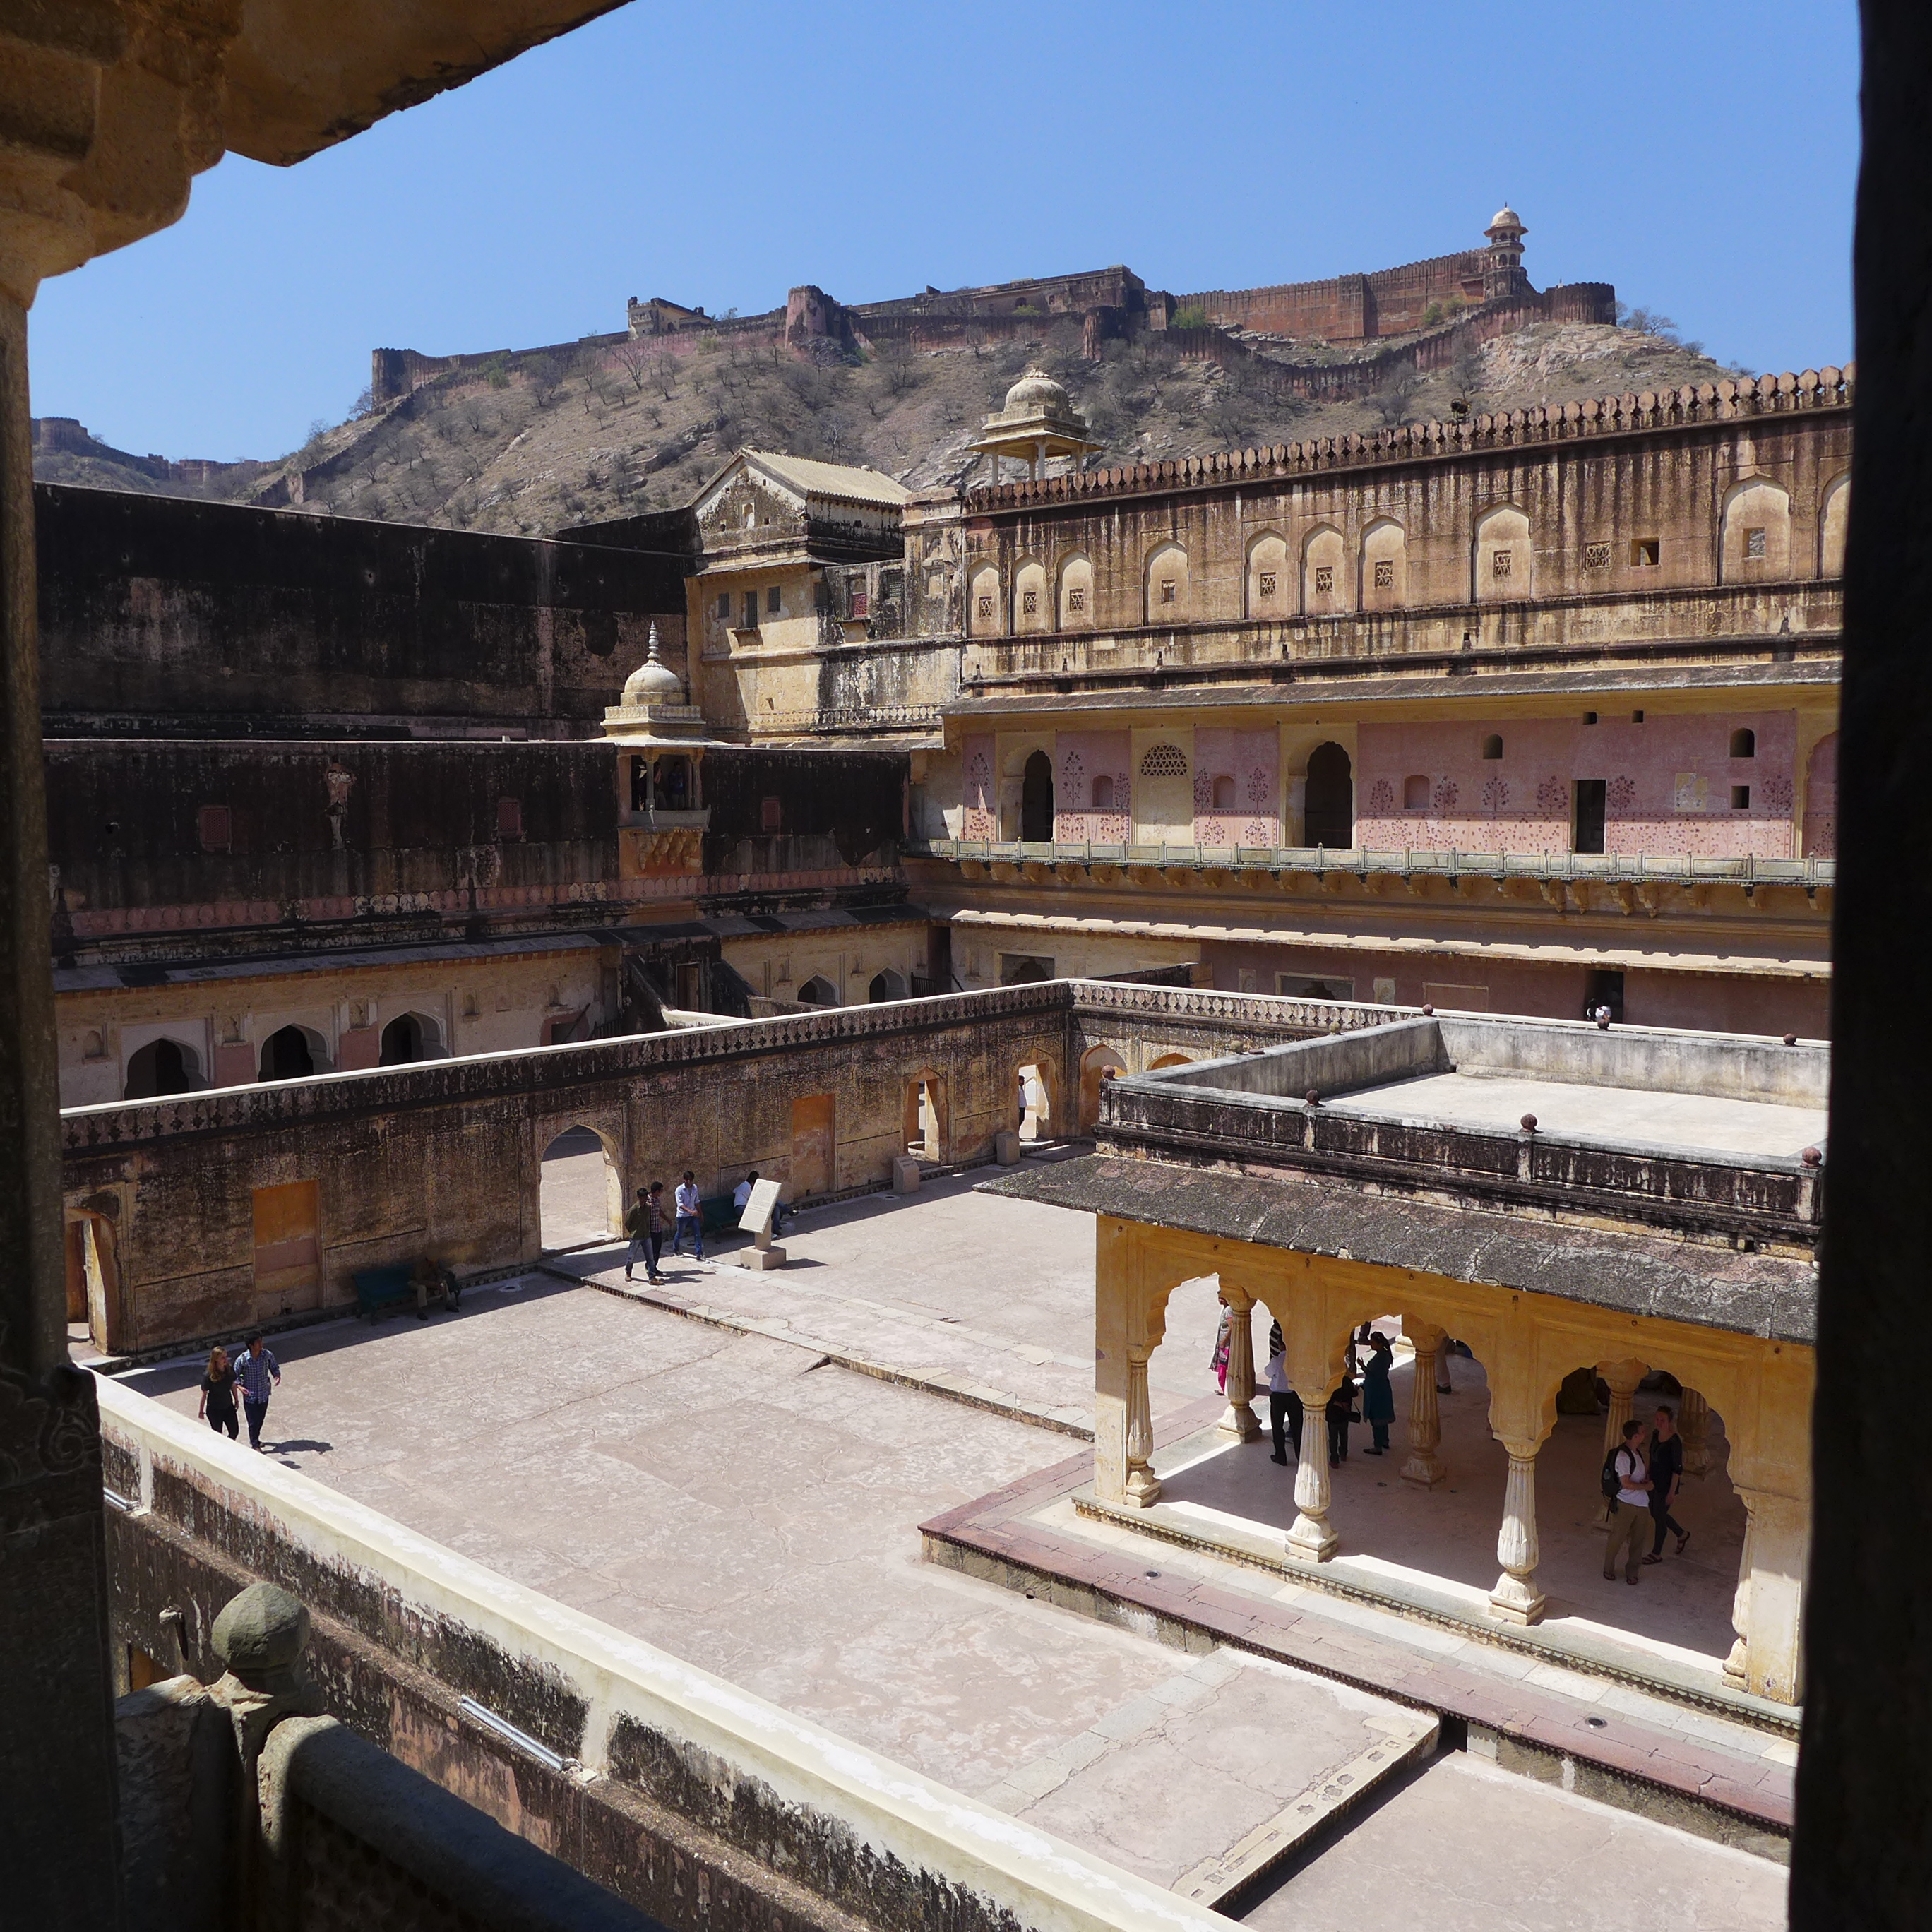 Courtyard with Palace of Man Singh1, and seen on the hilltop is the Jaigarh Fort.